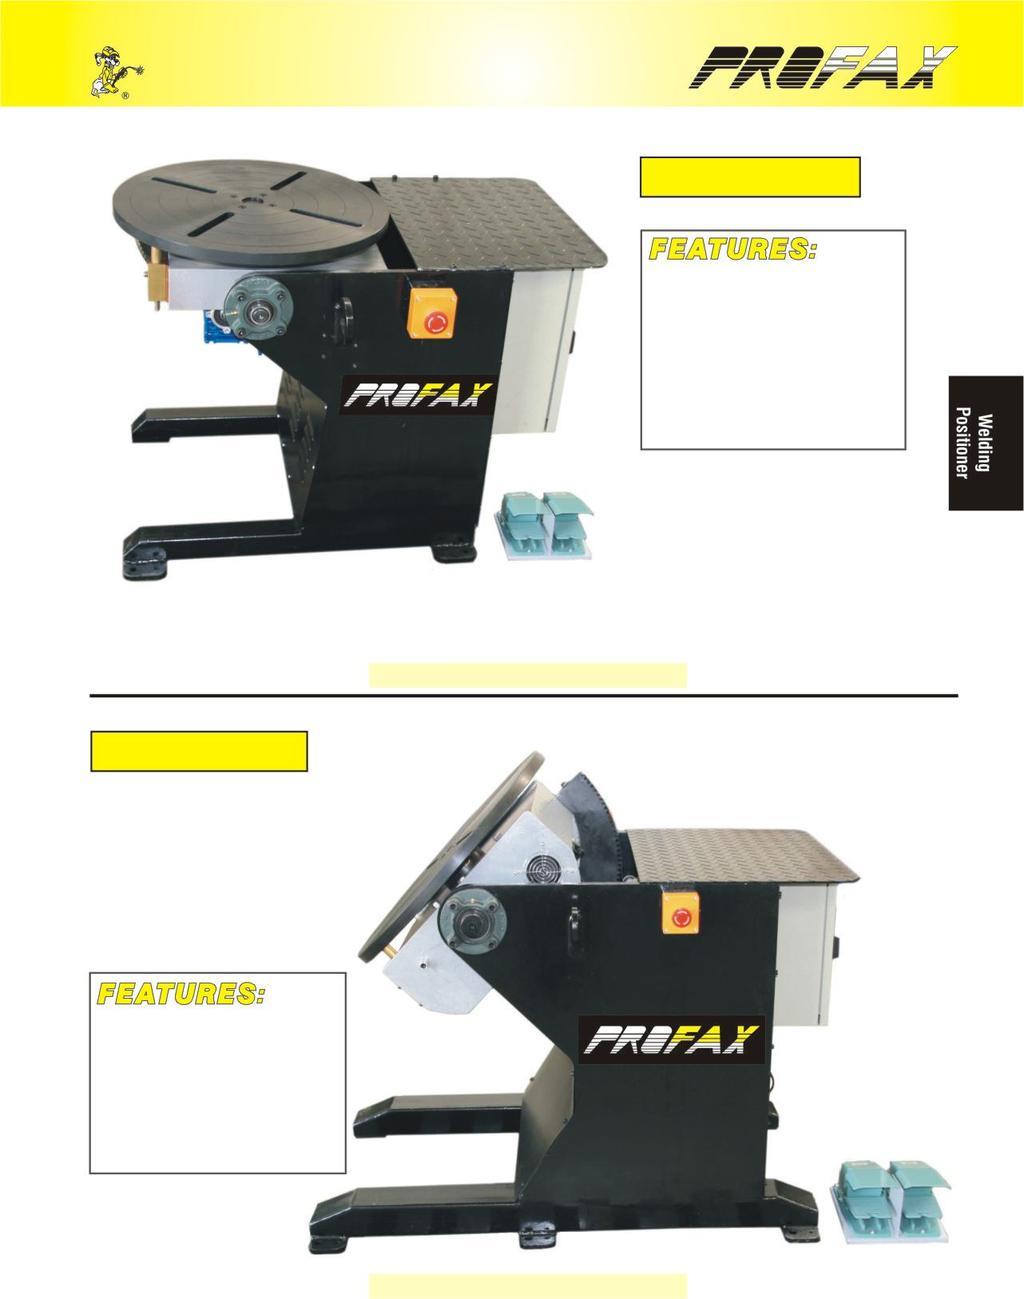 WELDING POSITIONERS WP-500 19-5/8 Diameter Table 0.4-4 RPM Rotation Speed Power Tilt Adjustment 0 to 135 Tilting Angle Standard Fwd./Rev. Foot Control Shipping Weight 580 lbs. Will hold 500 lbs.